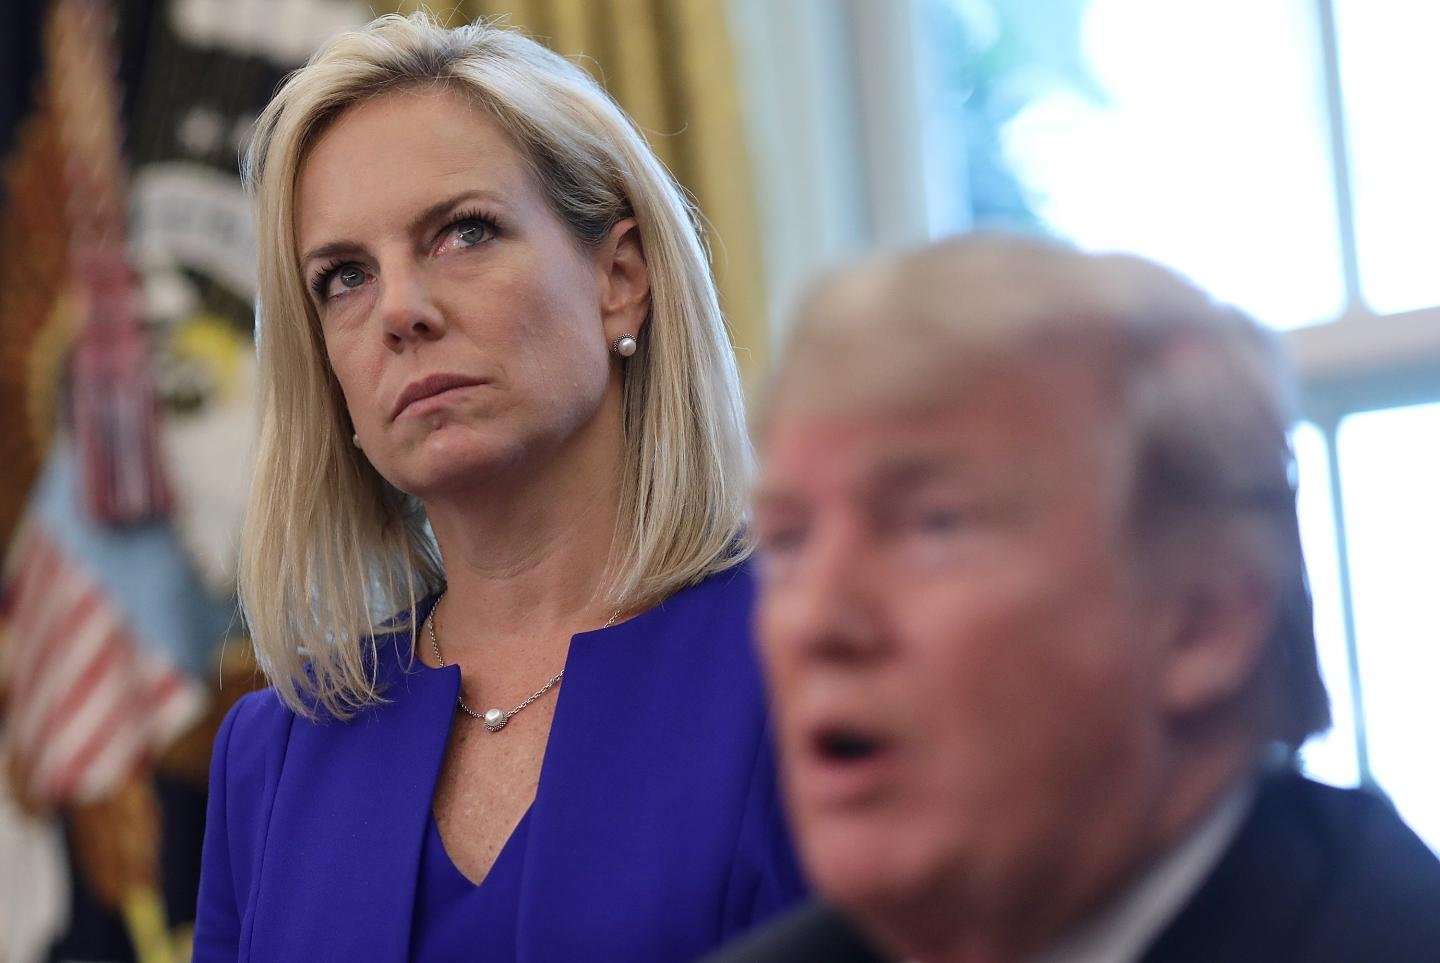 image for Donald Trump Used to Call Kirstjen Nielsen Early in the Morning, Demanding She Stop Migrants, Report Says